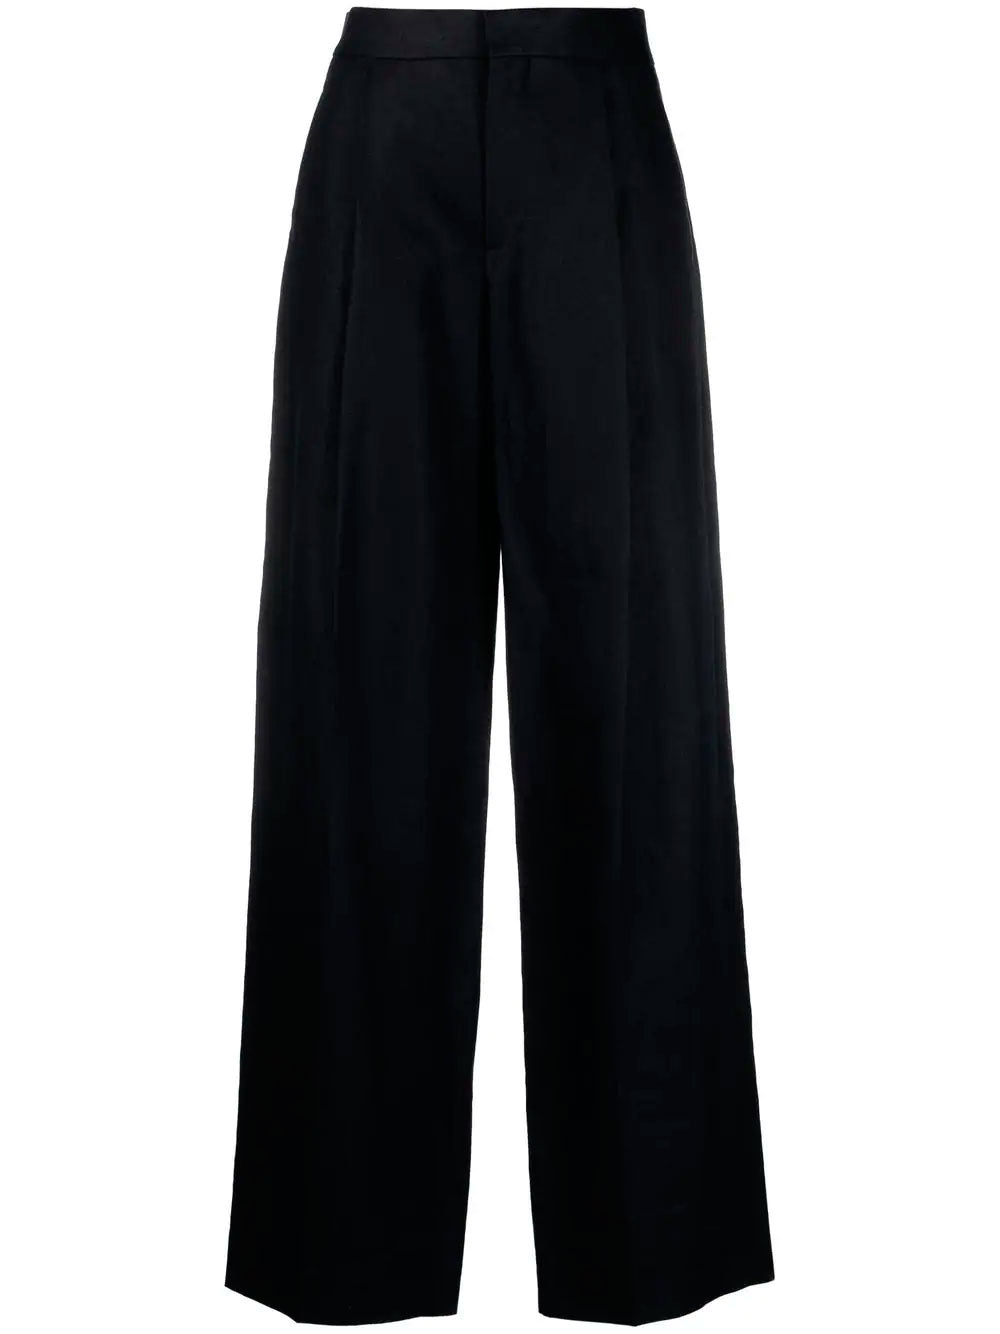 Pressed-crease tailored trousers